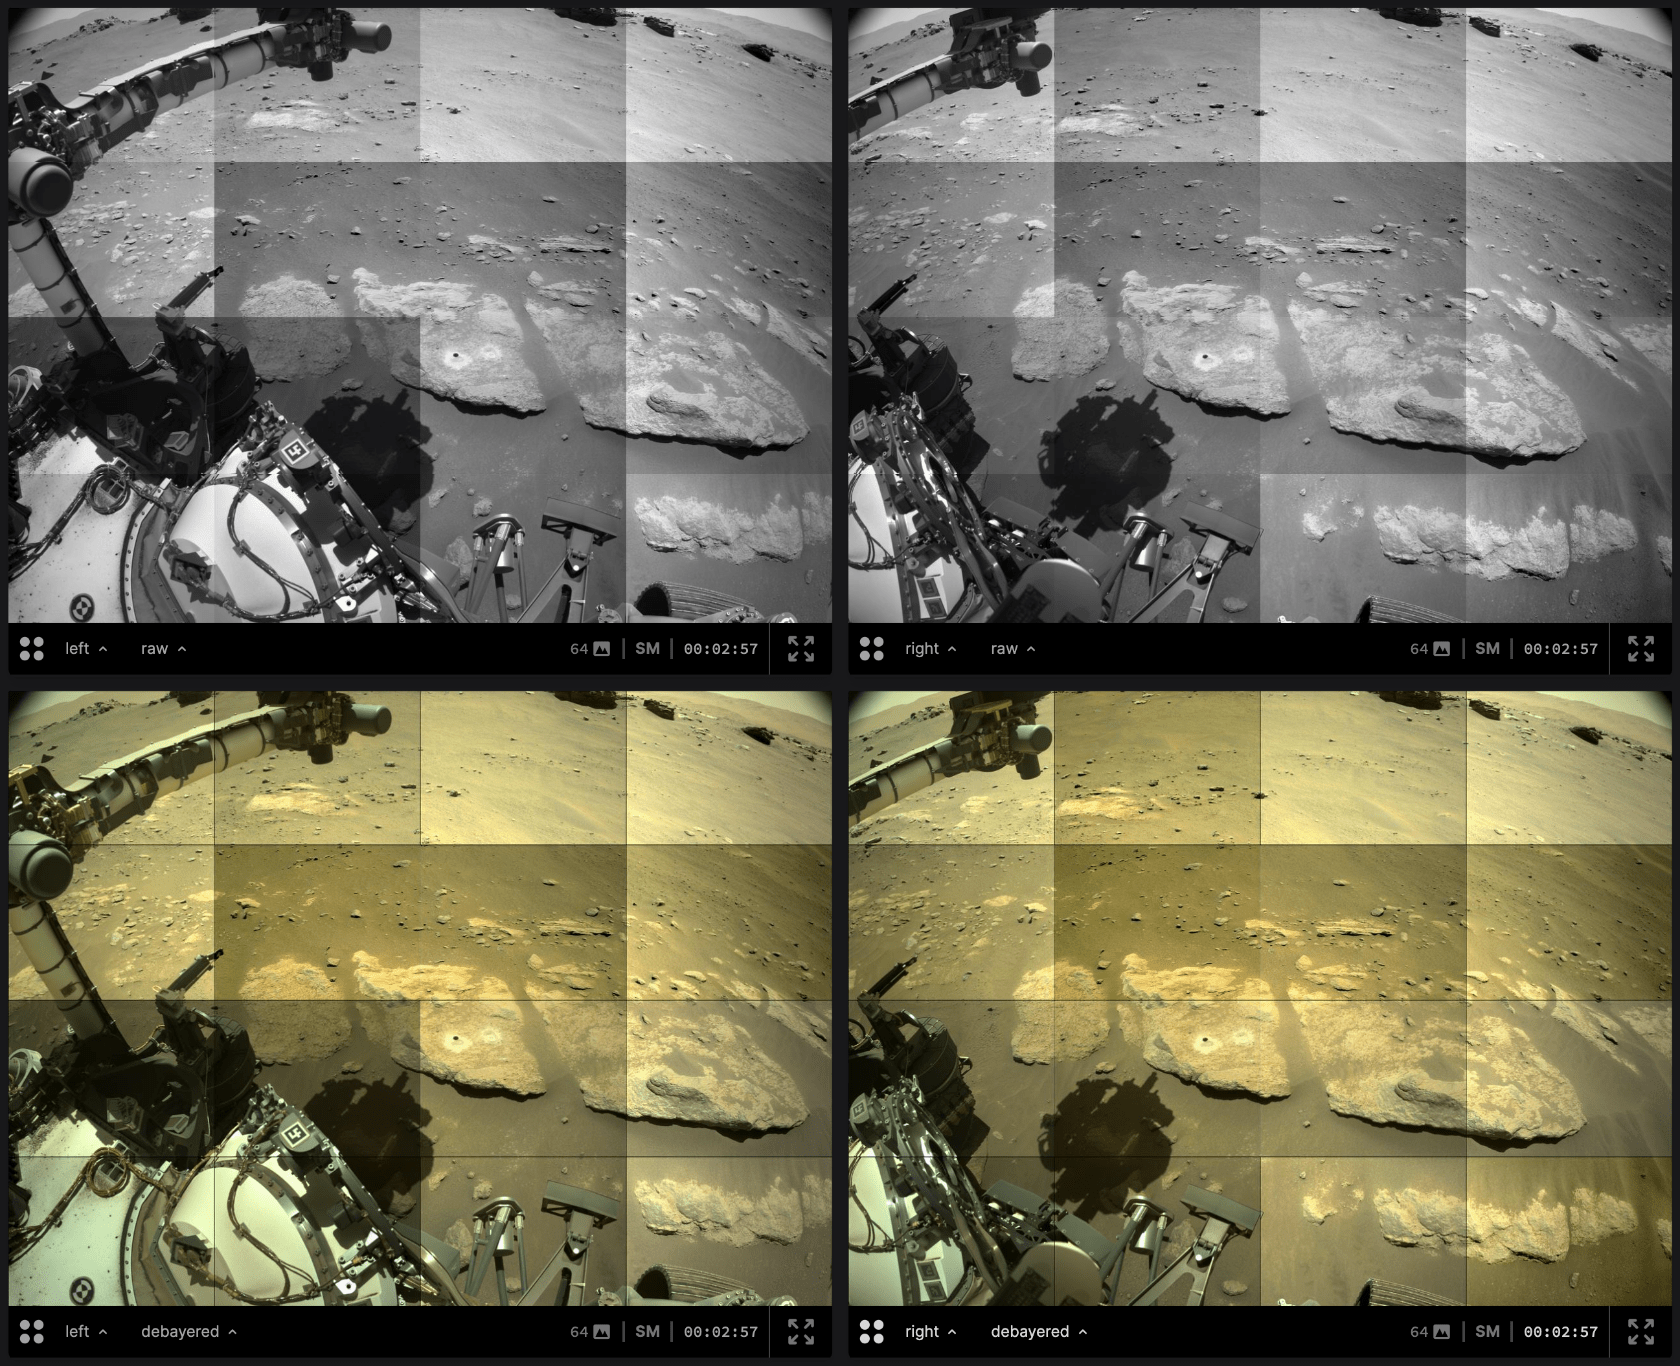 All possible combinations of sub-images for a single MosaicImage, created using data from Perseverance's Navcam. These consist of the raw and debayered versions of the Left and Right Navcam images. Each of the 16 images that make up the mosaic have 4 possible viewing modes, combining a total of 64 individual images into one, single, easily viewable frame.